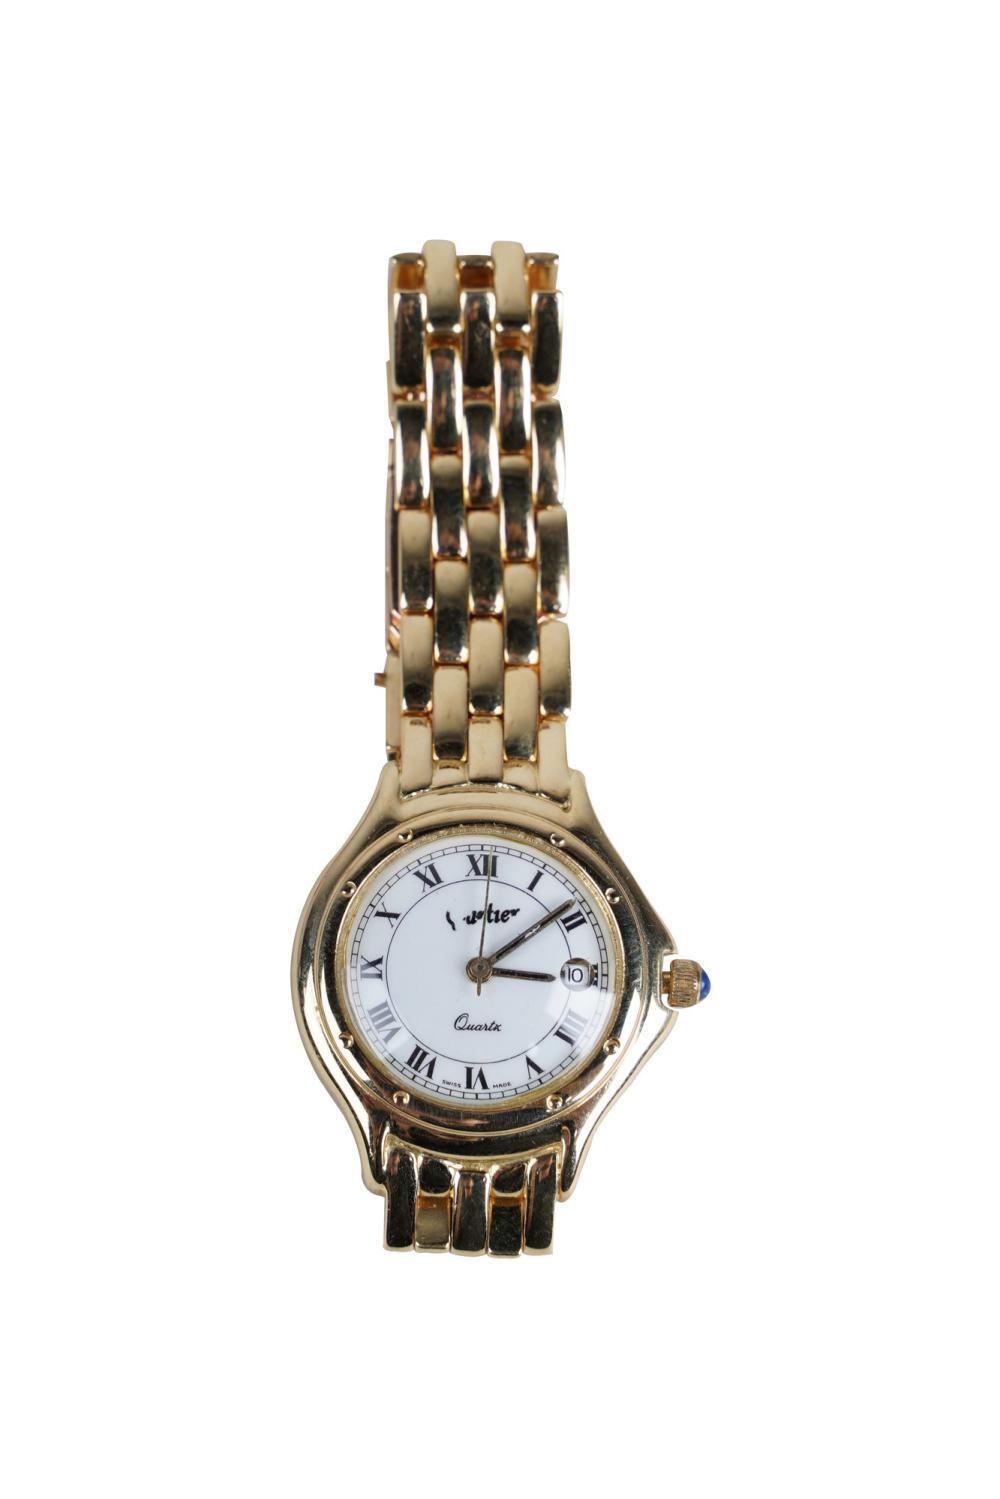 18 KARAT GOLD LADY'S WATCHwith